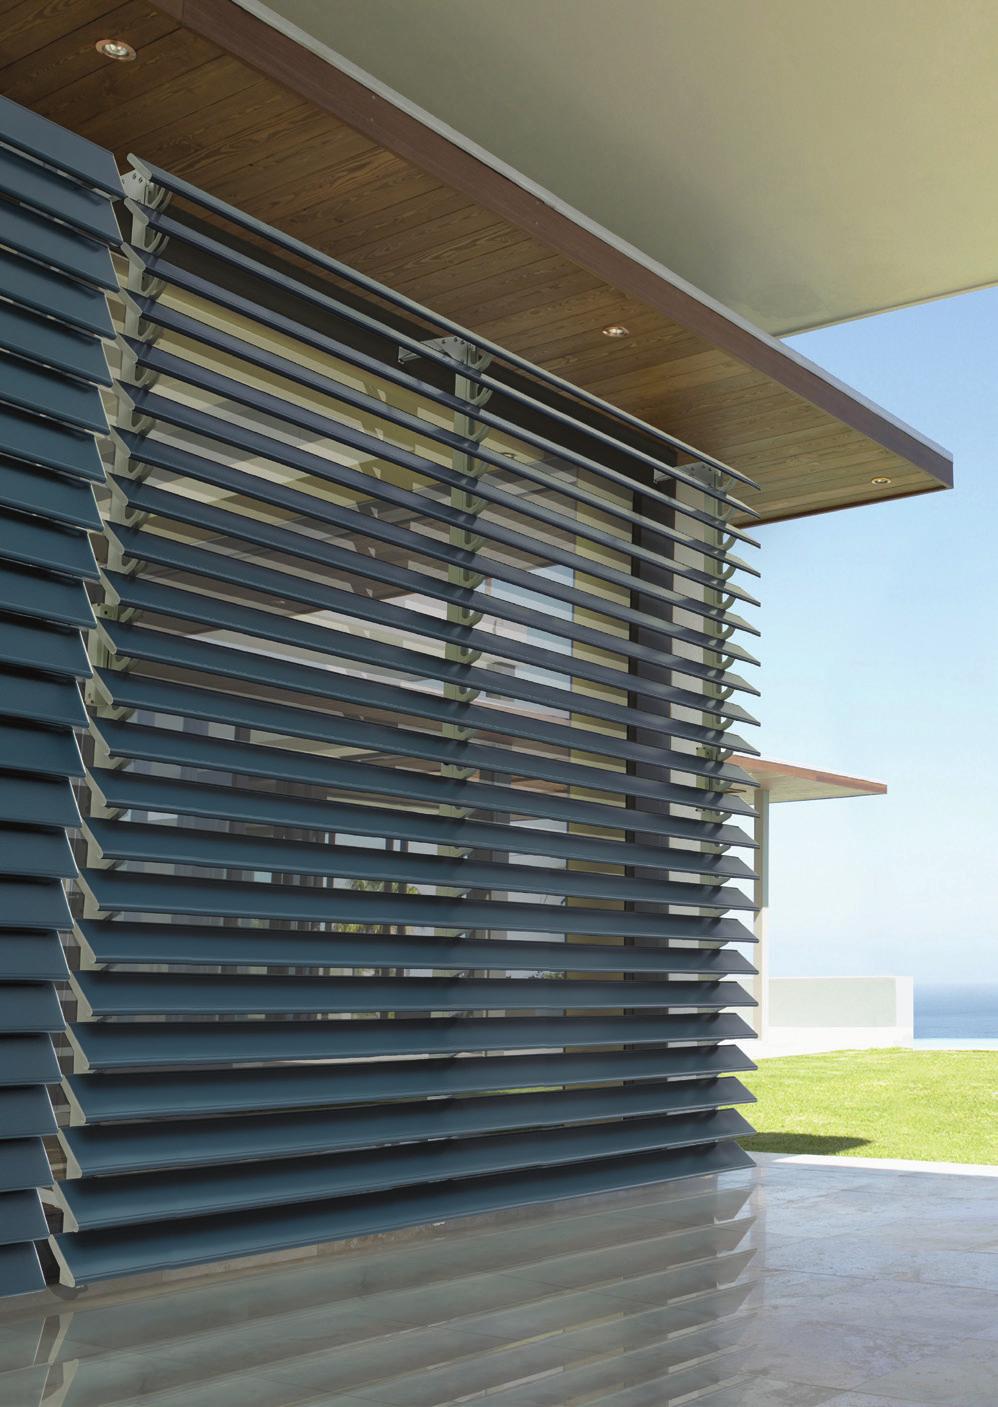 Concentrate on the areas where the stainless steel hardware is attached to the shutter. Remove any salt residue, tannin stains caused by trees and other marks created.